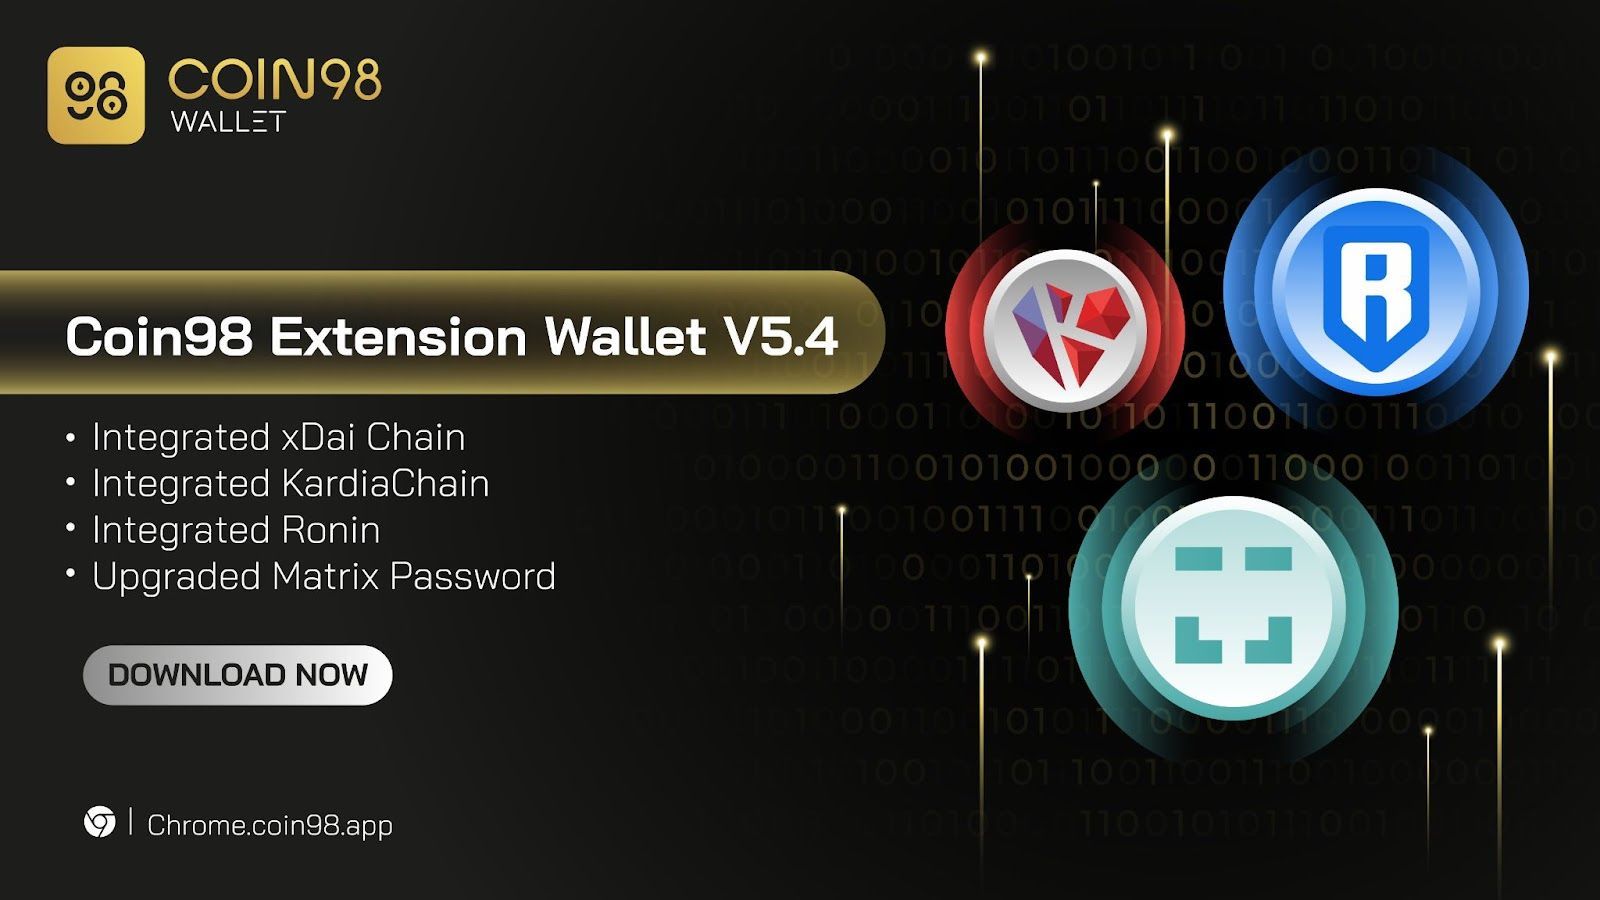 KardiaChain, Ronin, xDai Chain are available on Coin98 Extension Wallet V5.4